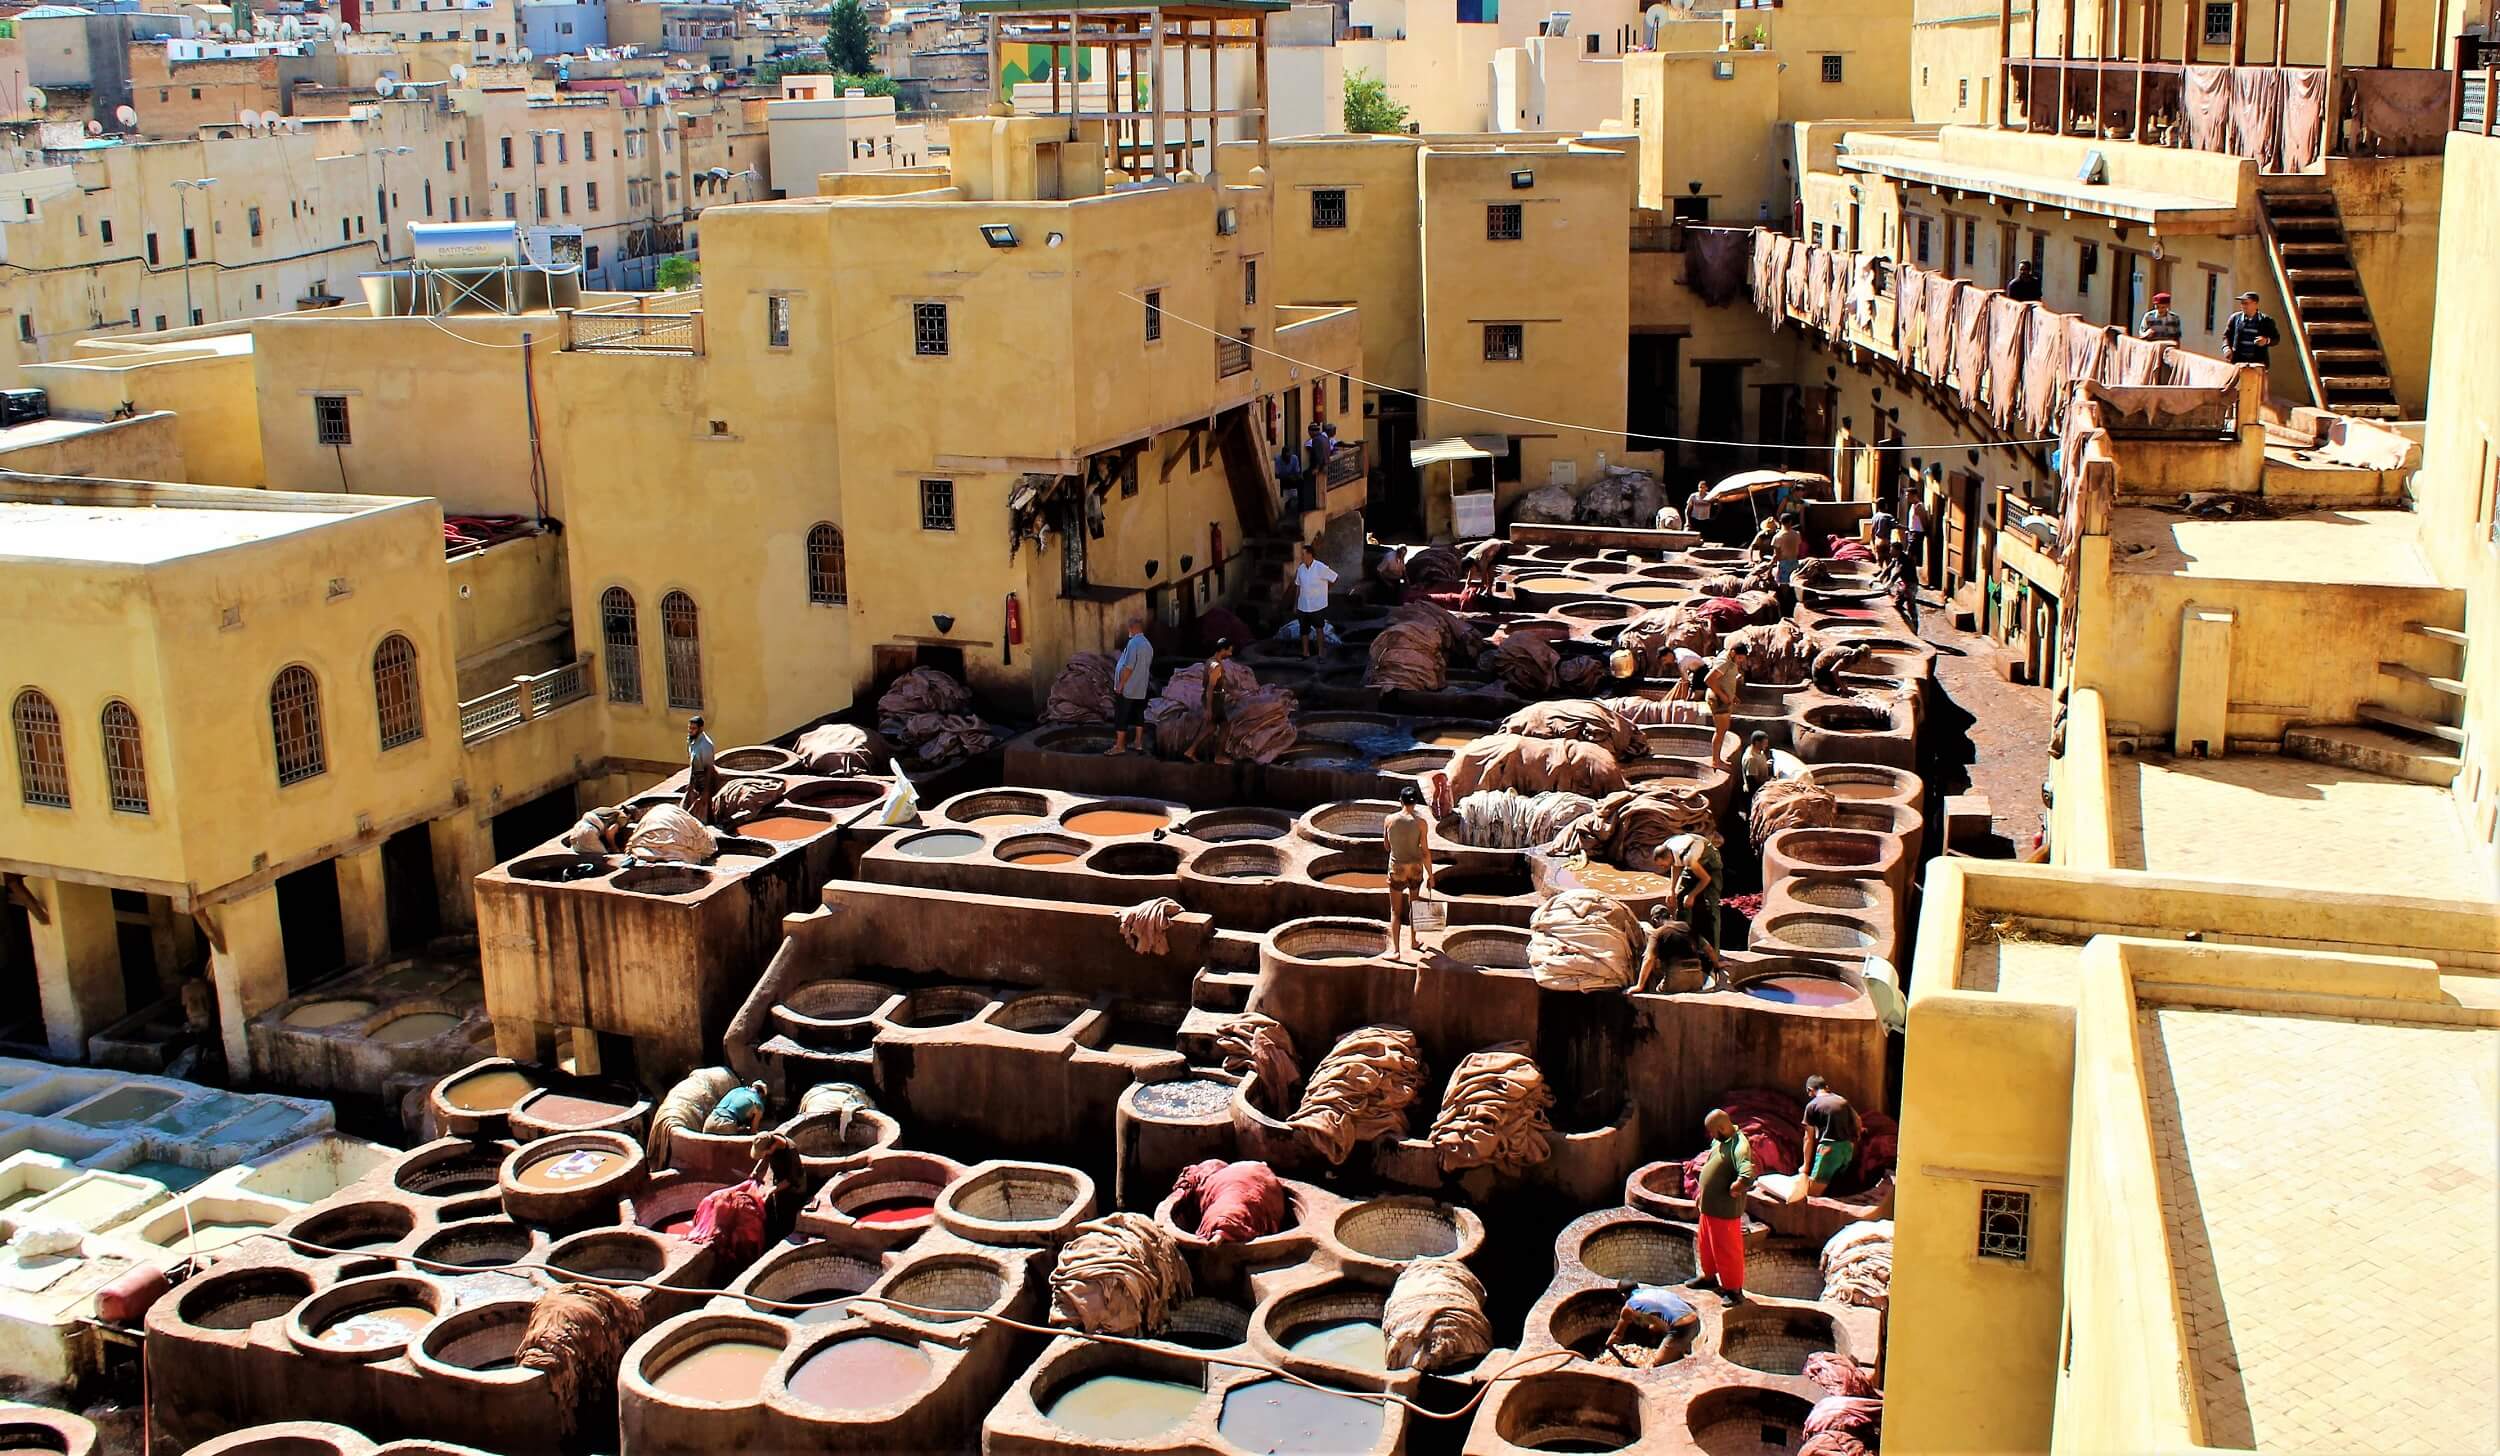 The Fes dye pits in Morocco. - Picture of Fes, Fes-Meknes